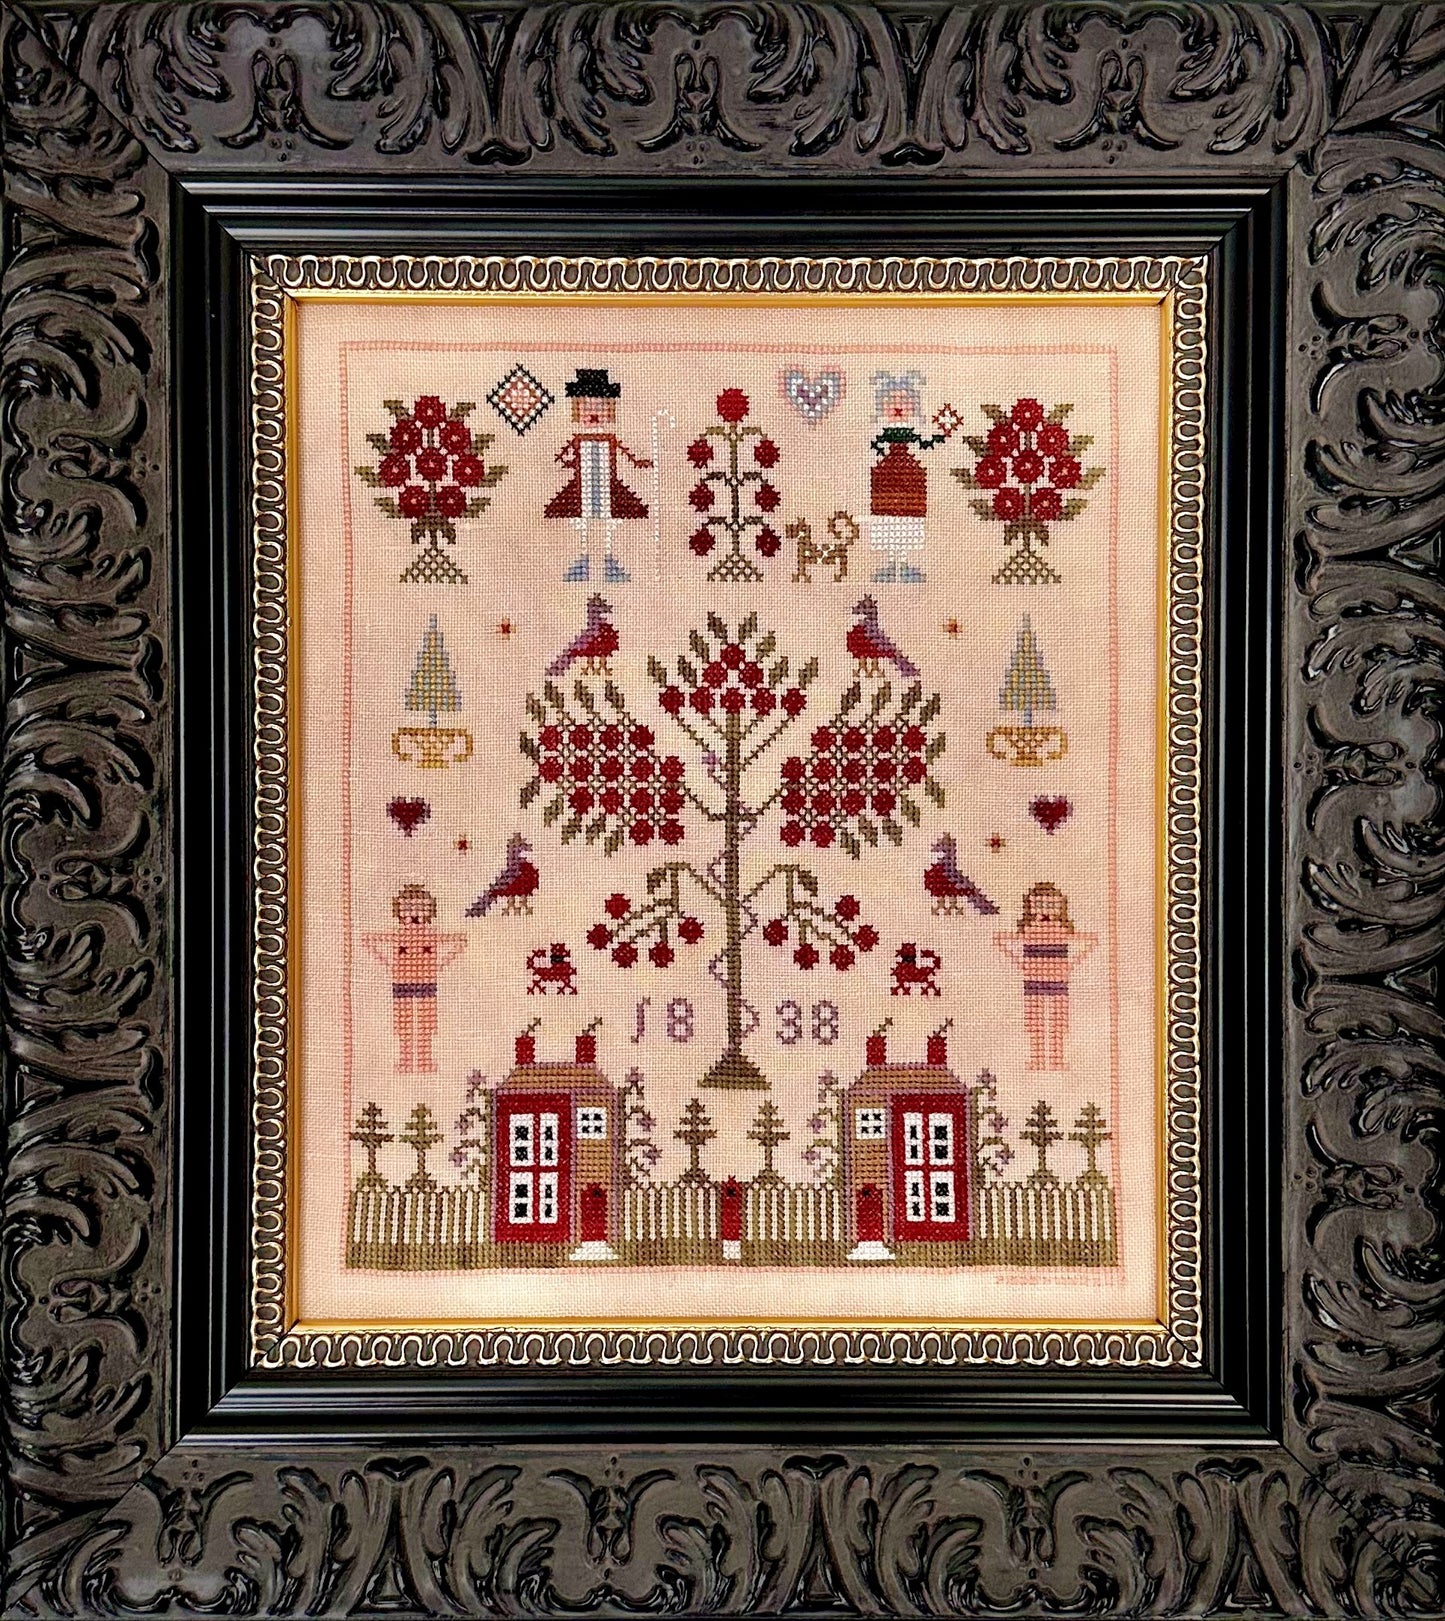 Two Red Houses - Reproduction Sampler Pattern by Fox & Rabbit Designs